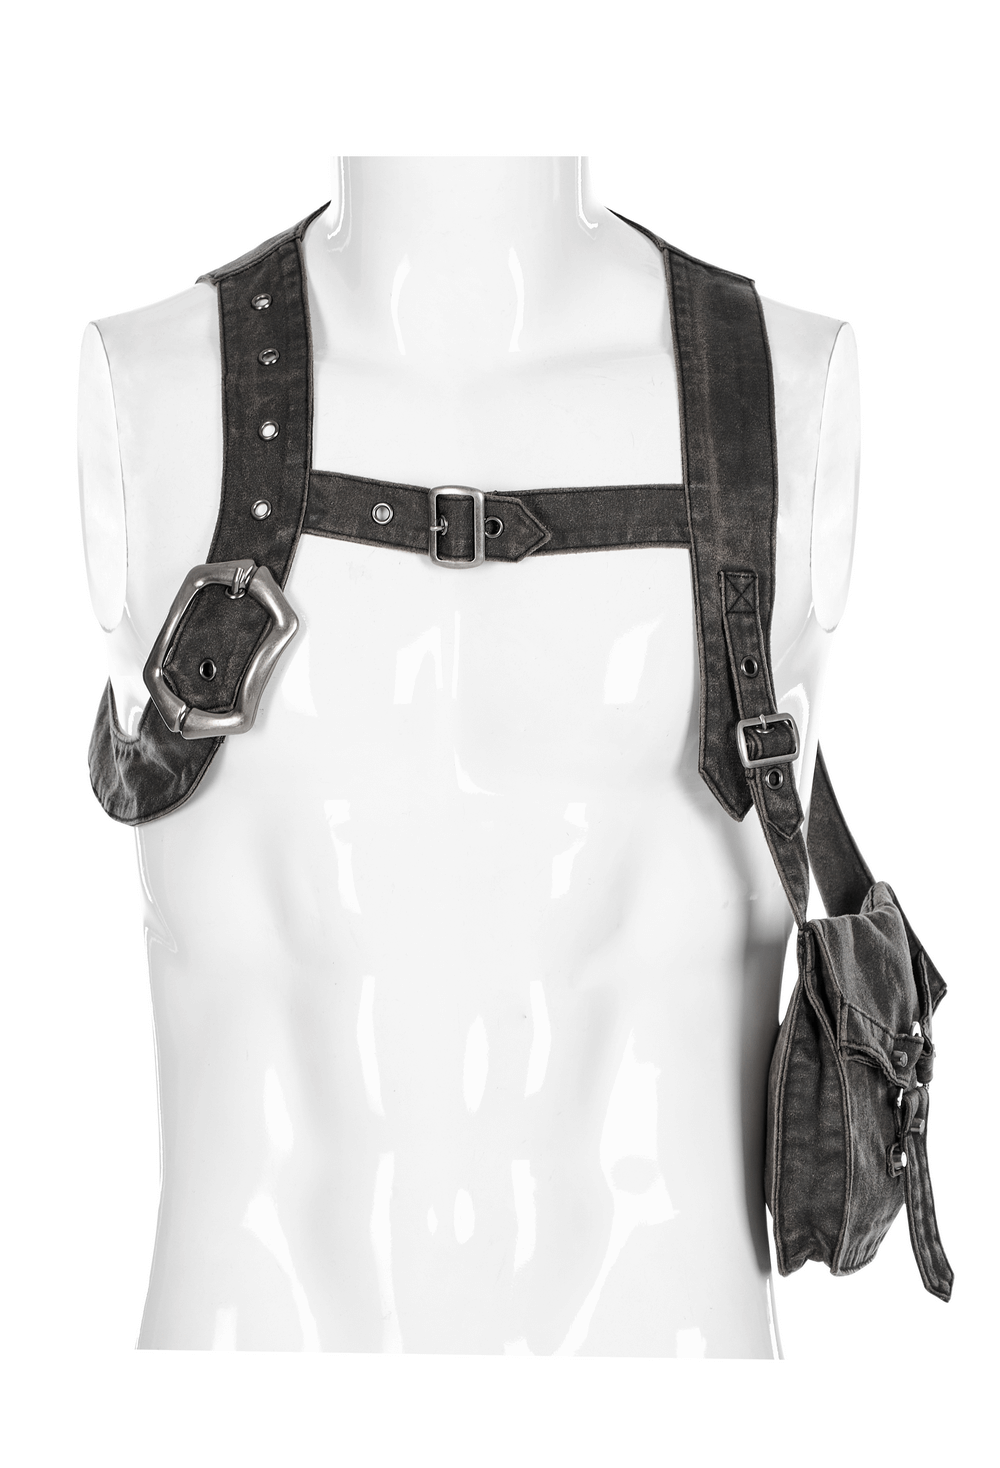 Post-Apocalyptic Leather Crossbody Bag with Buckle